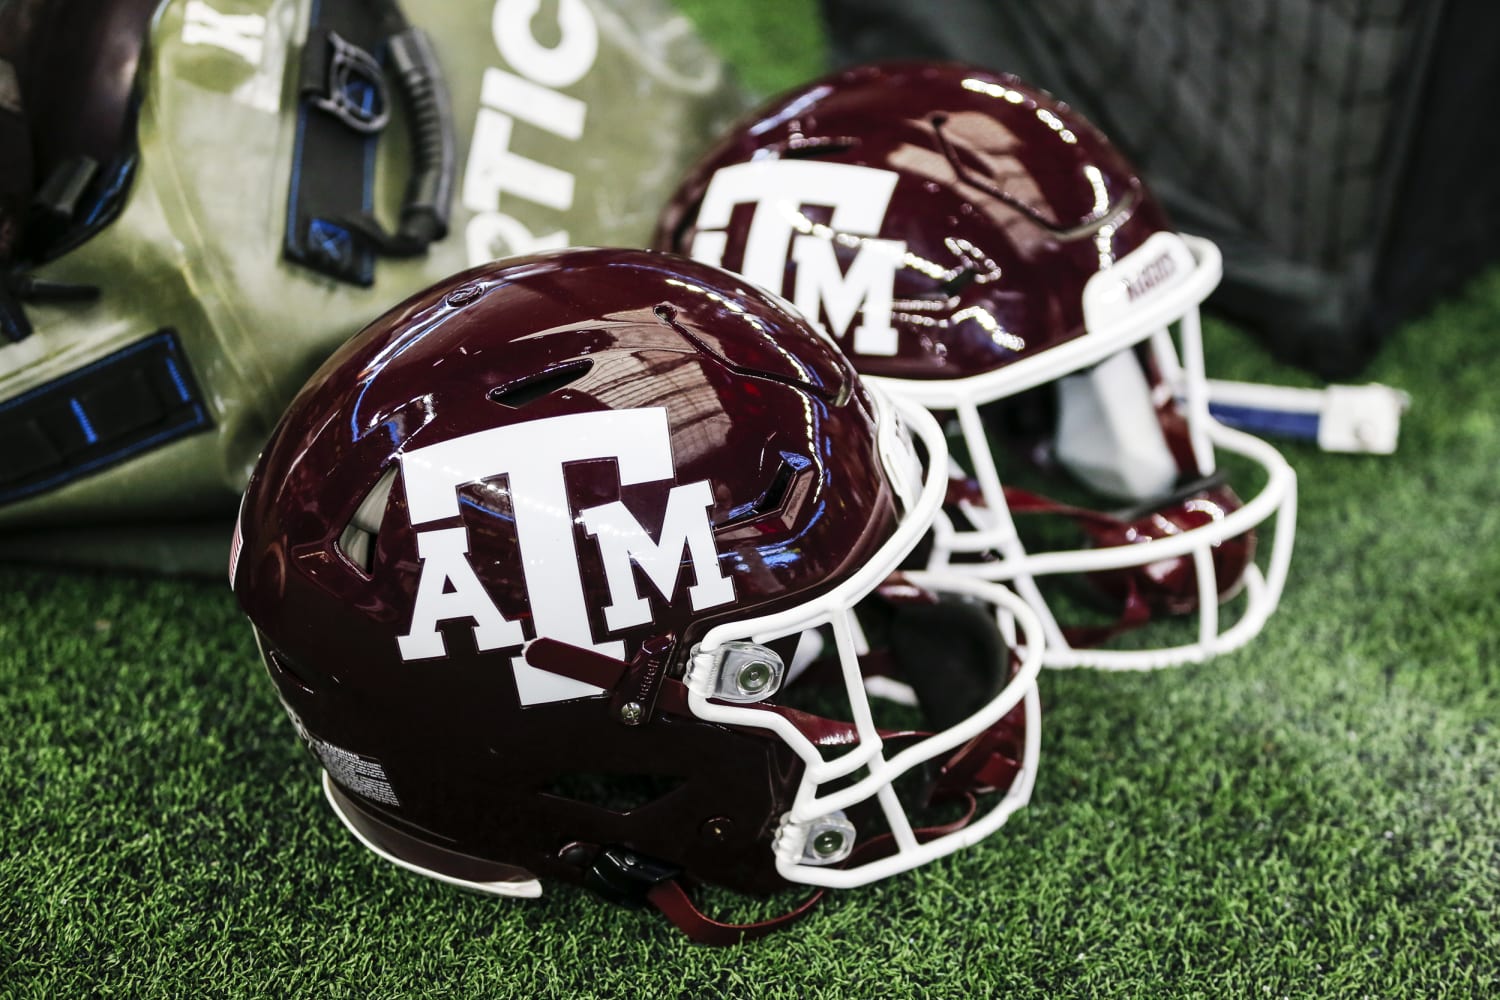 Texas A&M backs out of Gator Bowl after Covid outbreak leaves team without enough players